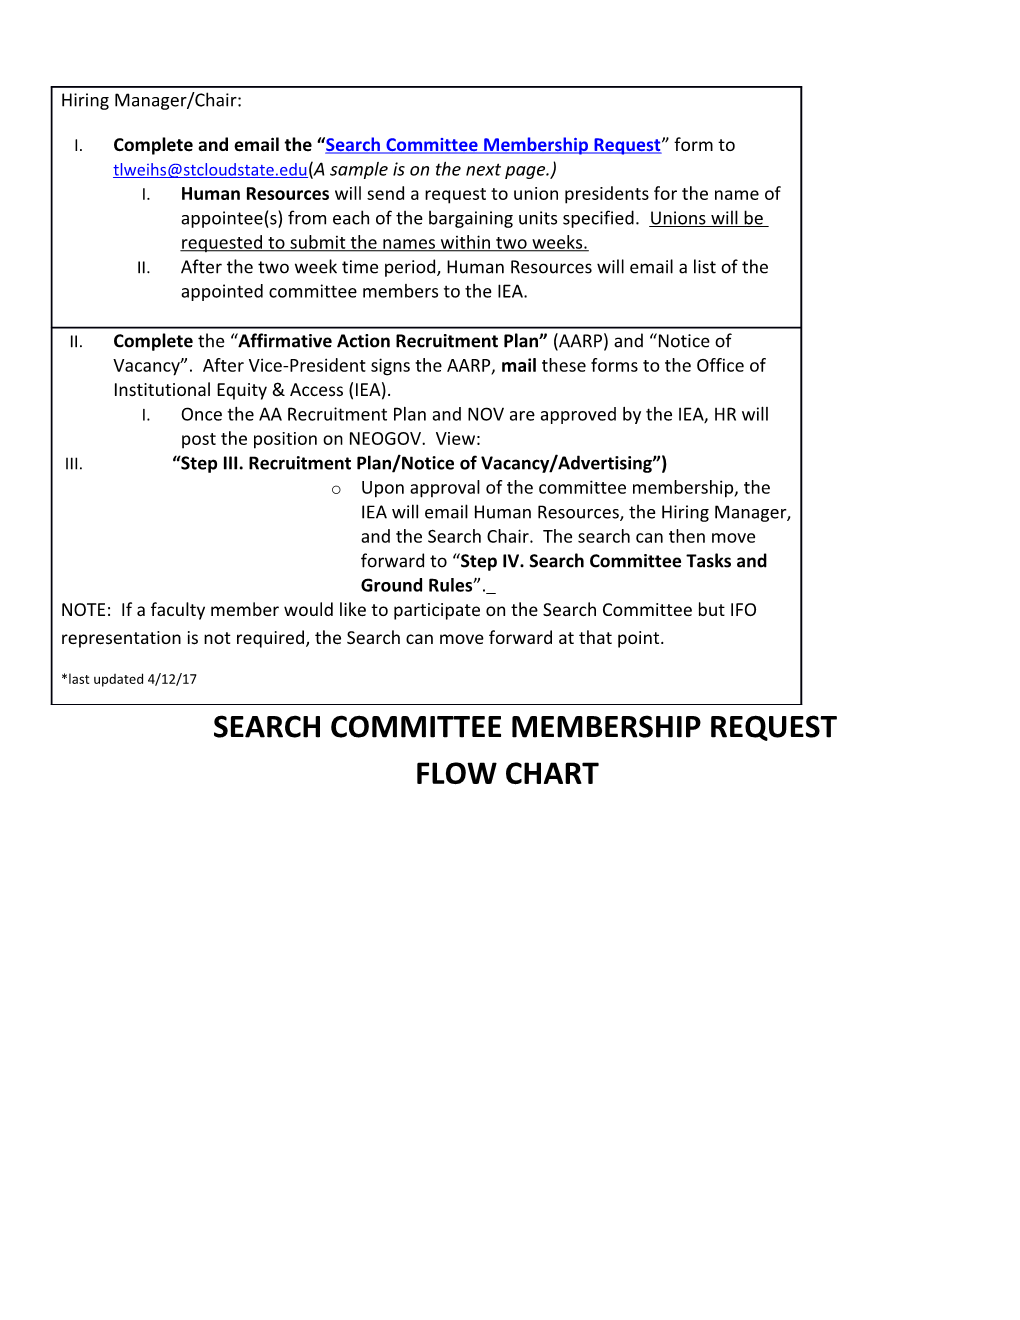 Complete and Emailthe Search Committee Membership Request Form to (A Sample Is on The